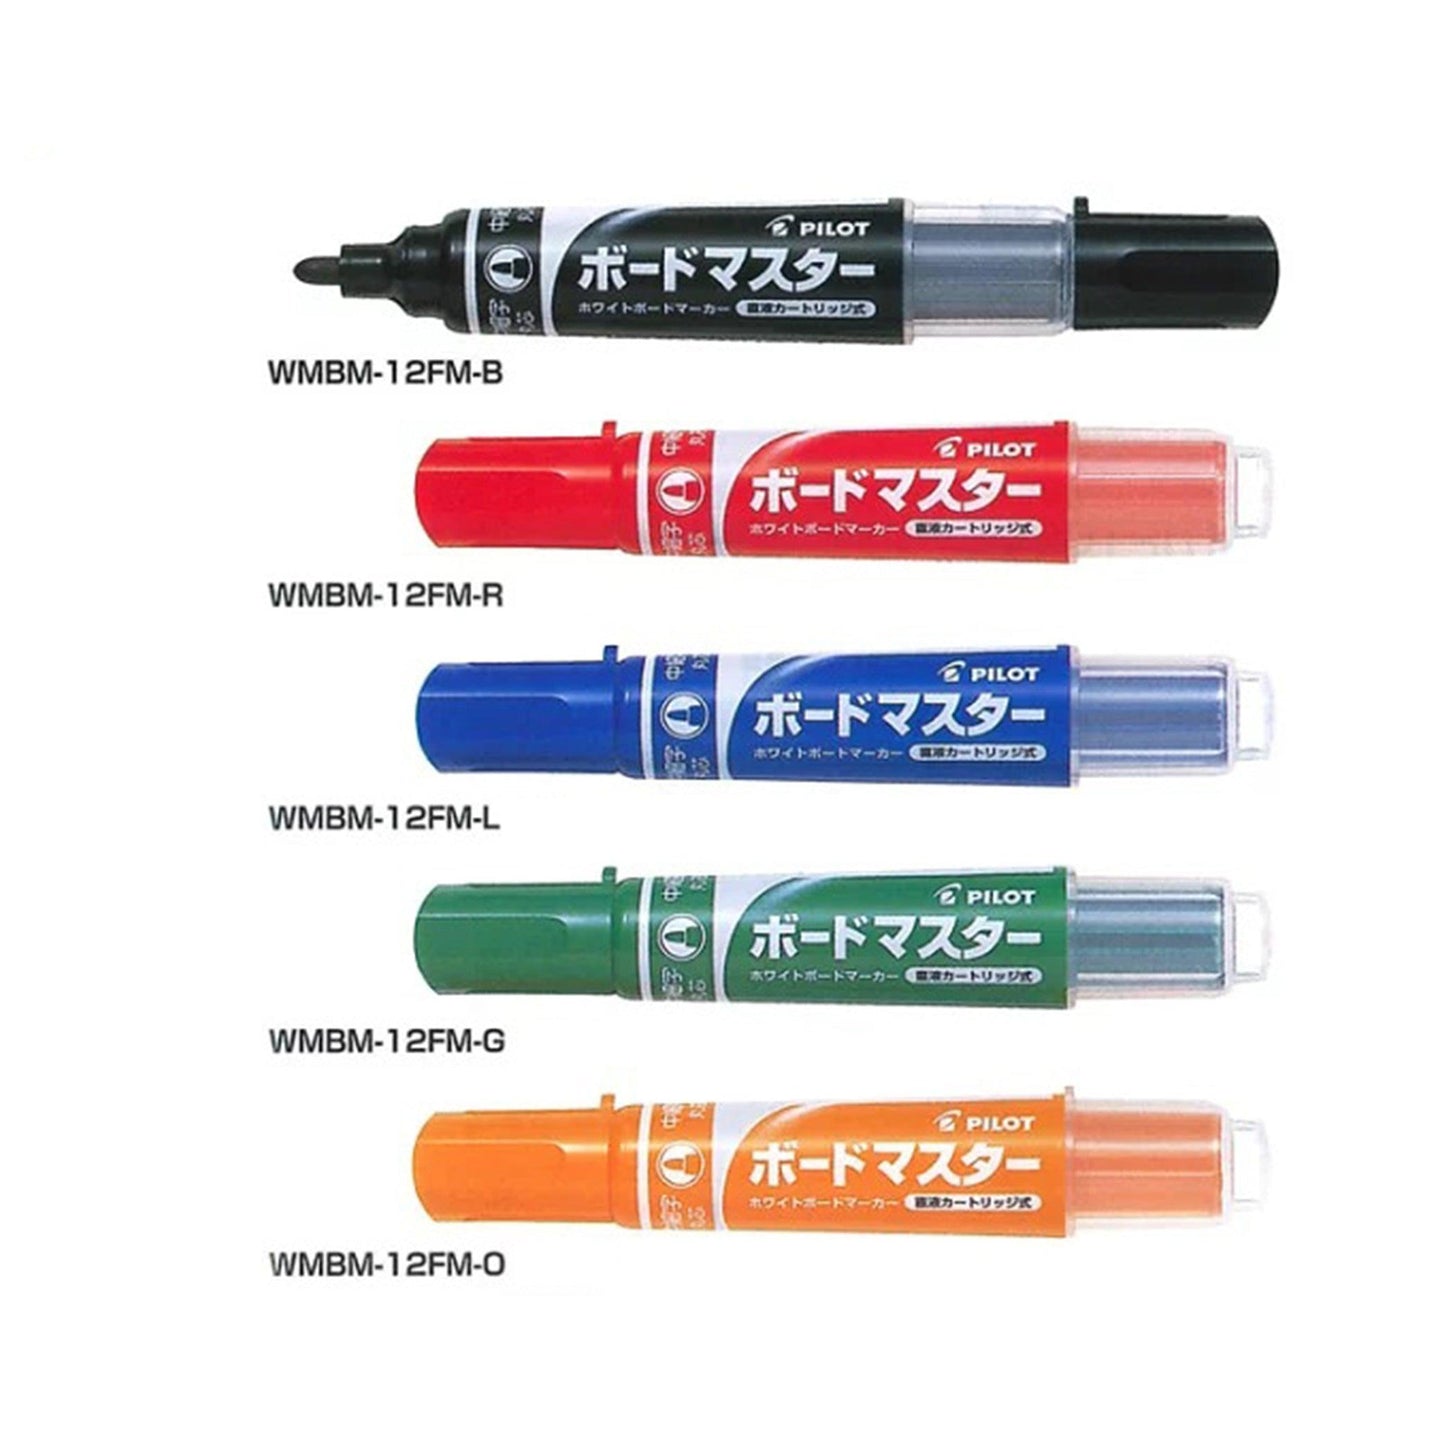 PILOT WMBM-12FM REPLACEABLE CARD WATER MEDIUM AND FINE FONT WHITEBOARD PEN - CHL-STORE 